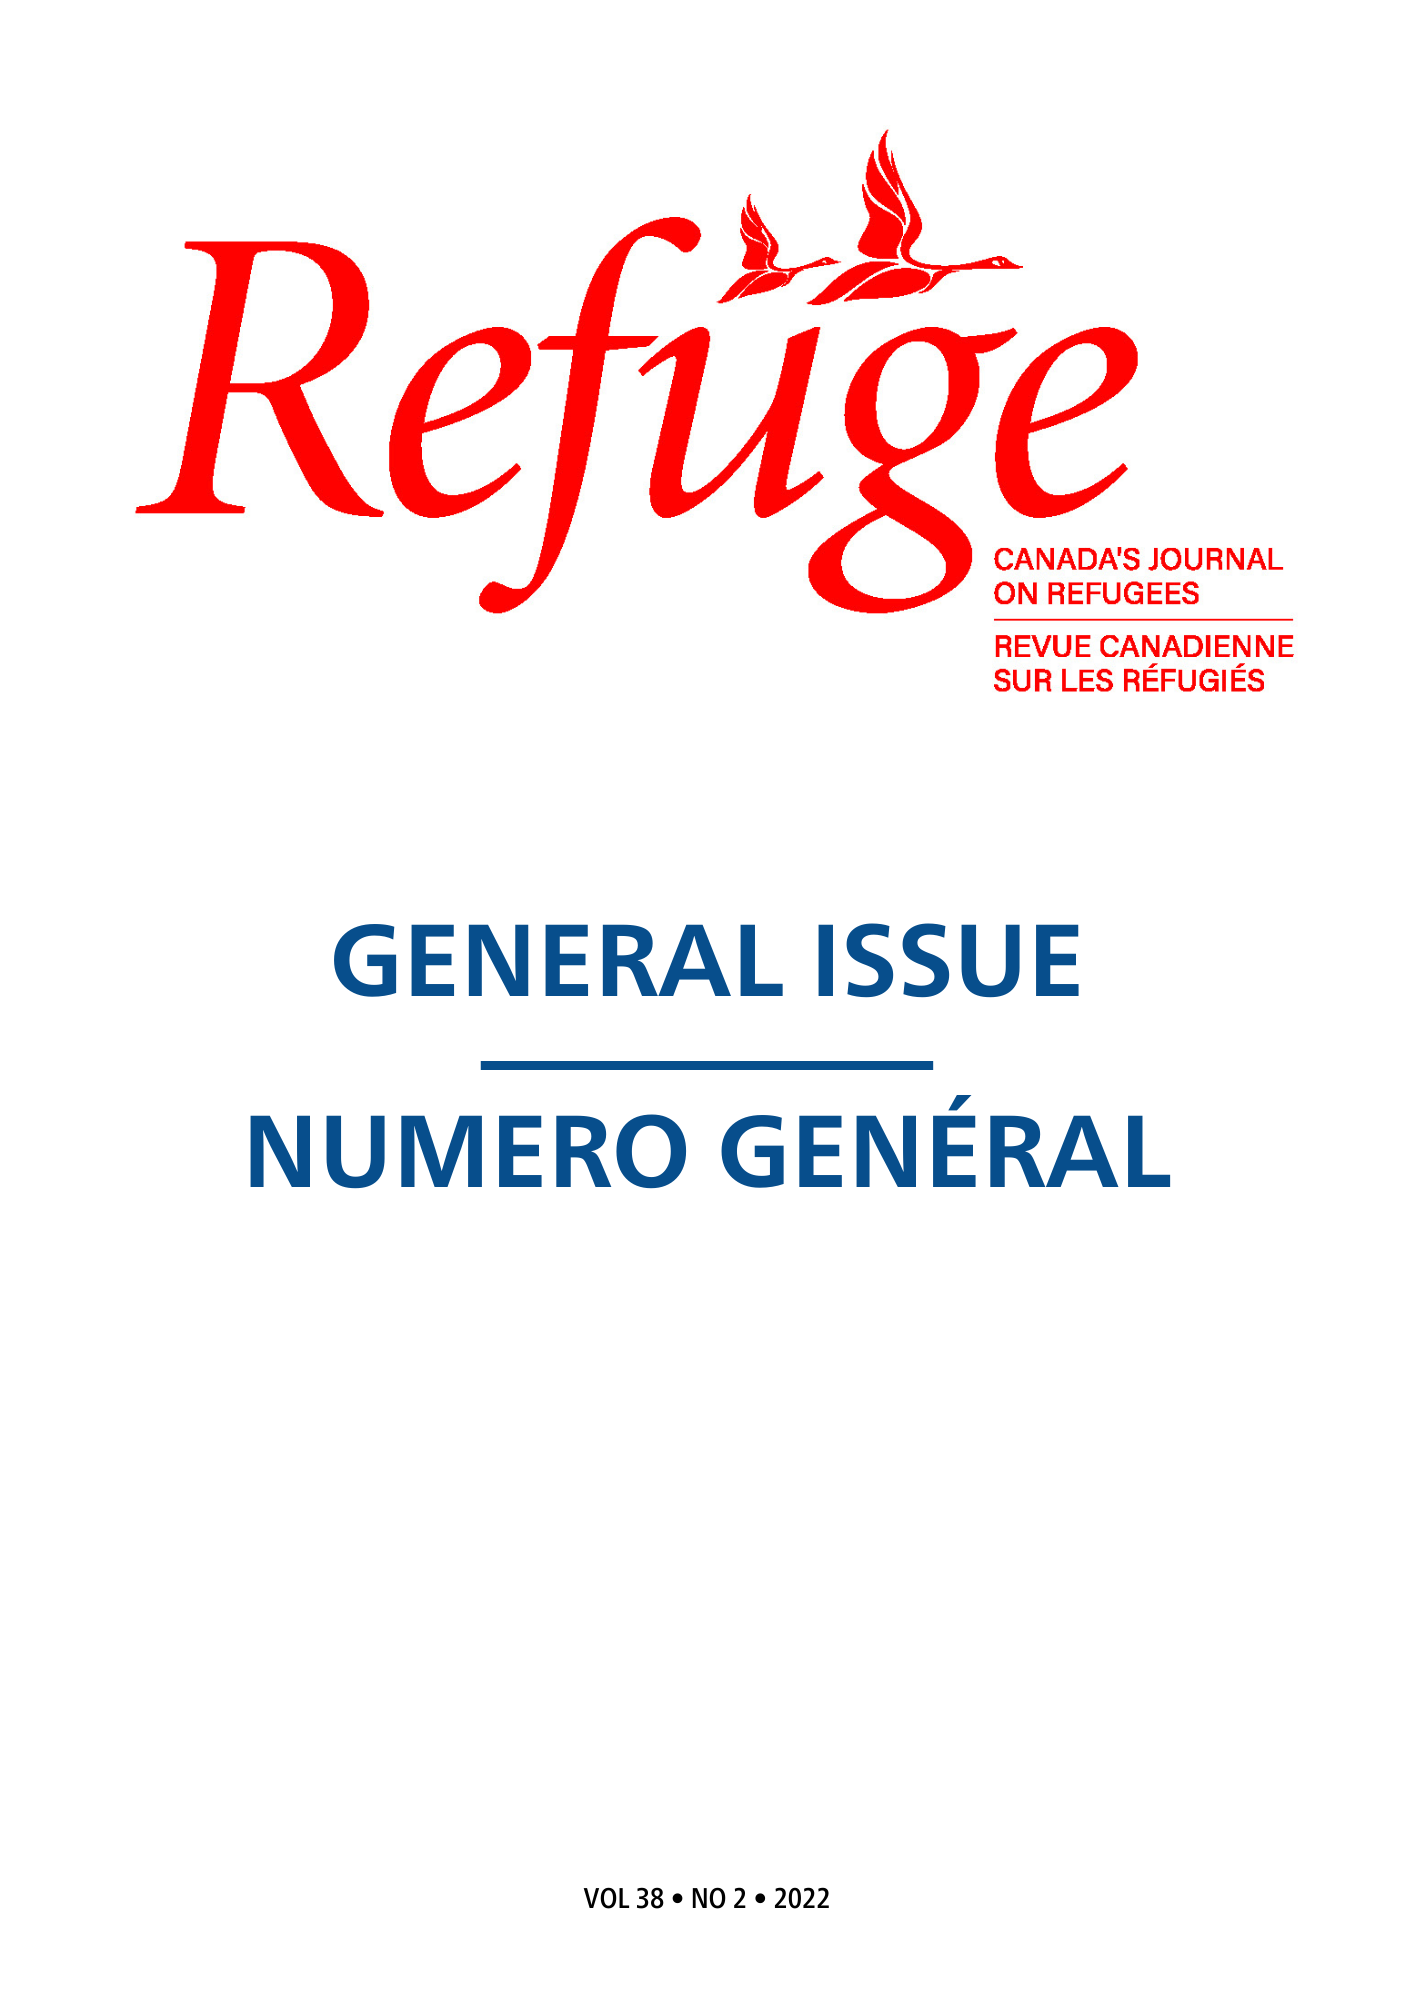 					View Vol. 38 No. 2 (2022): General Issue 
				